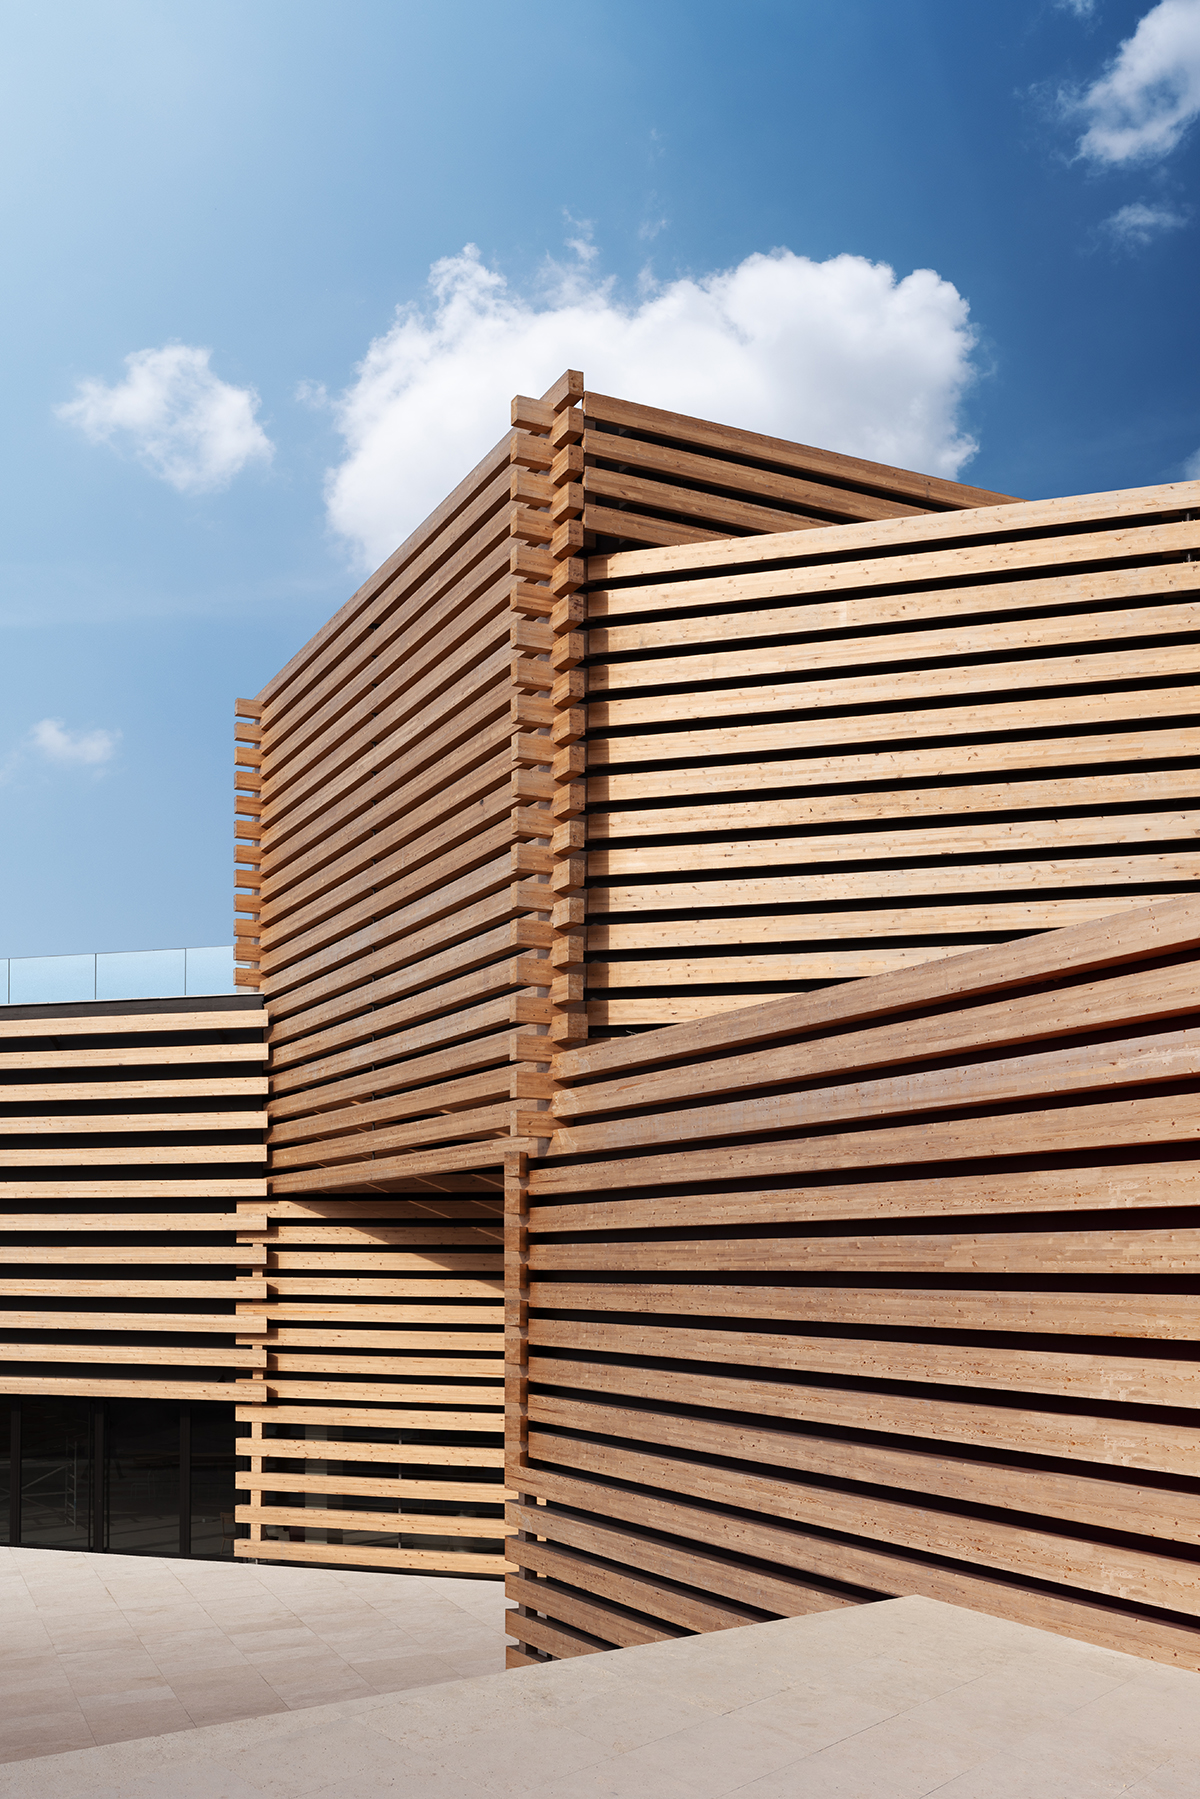 Facade of a contemporary building made from wooden panels